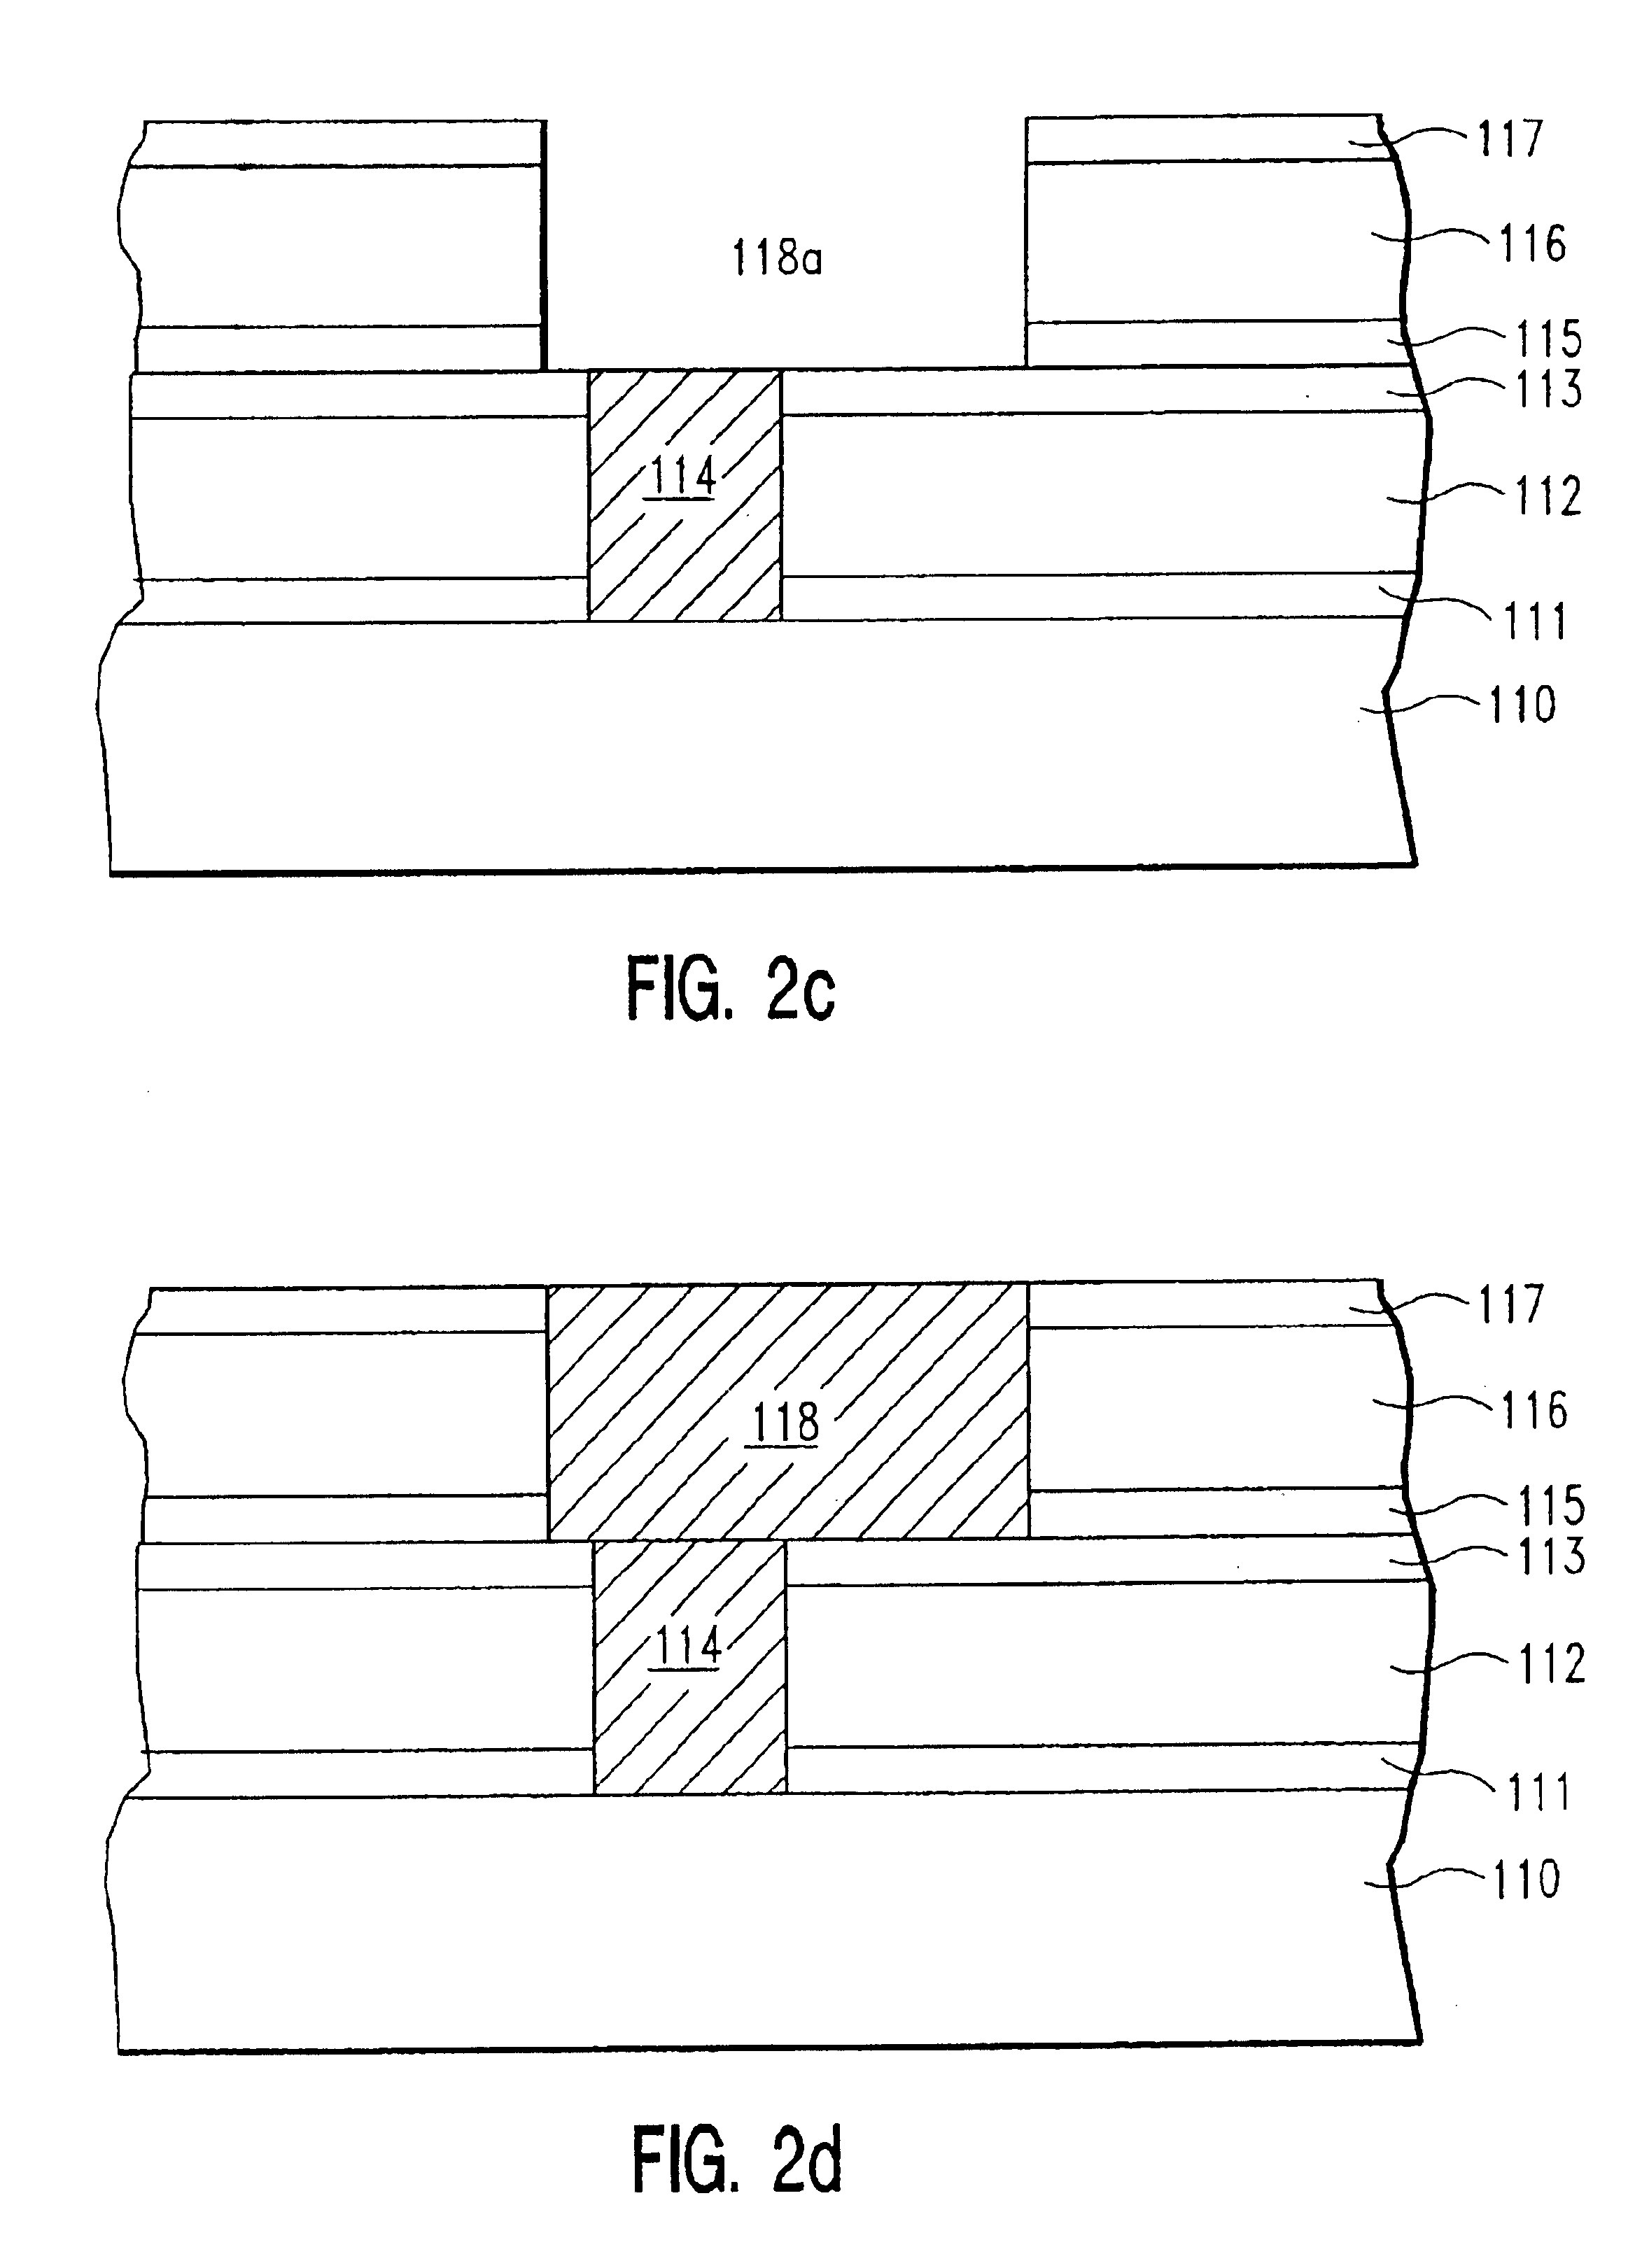 Reliable low-k interconnect structure with hybrid dielectric